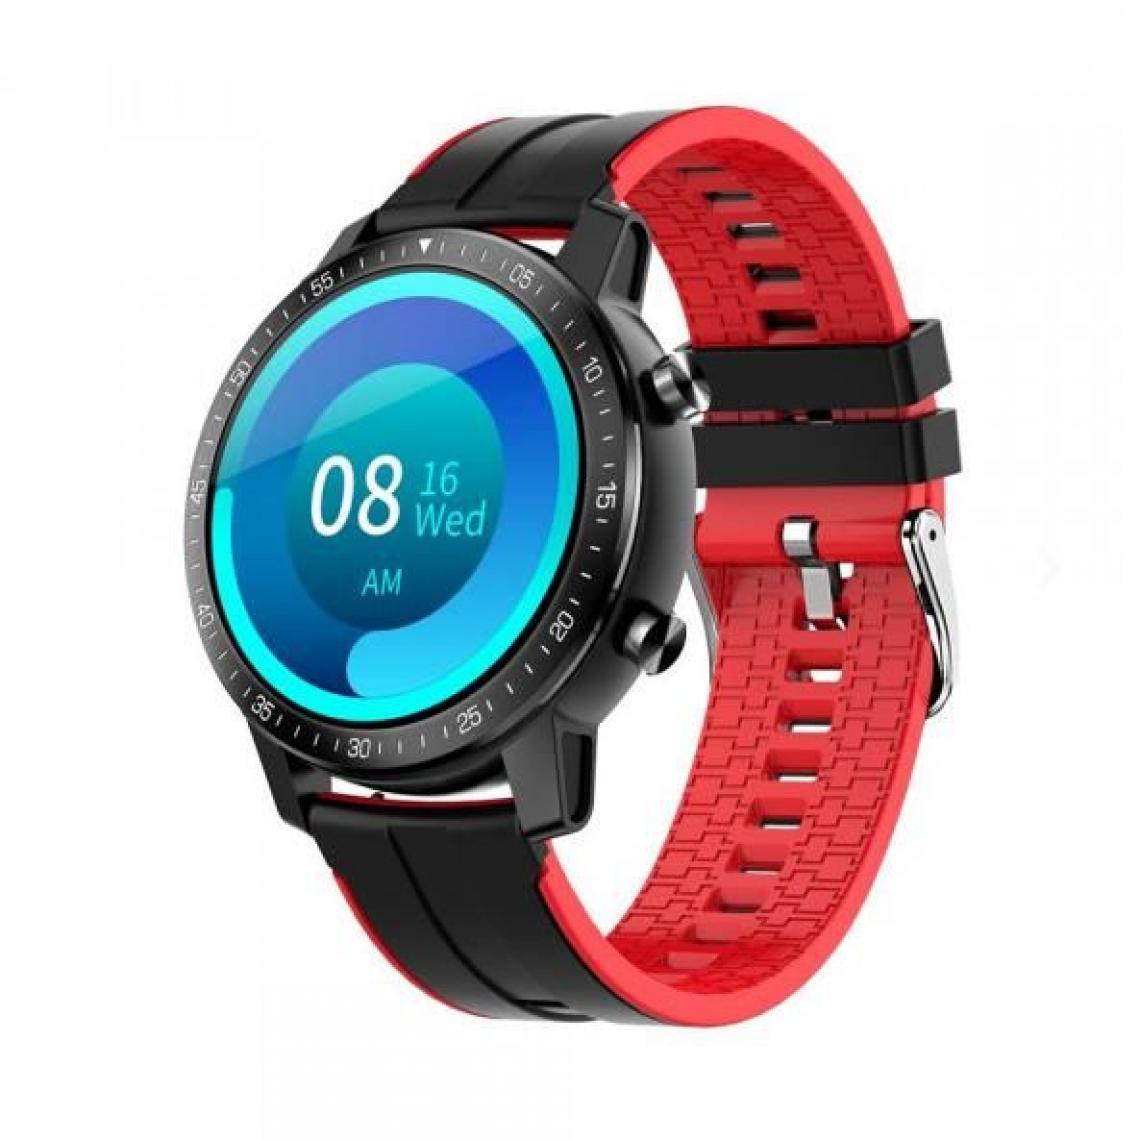 Inconnu - SMARTWATCH SPORTS WATCH BLACK RED SENBONO S30 1.3 inch 240x240 - WATERPROOF IP68 + SPORT AND COMMUNICATORS FUNCTIONS - Montre connectée